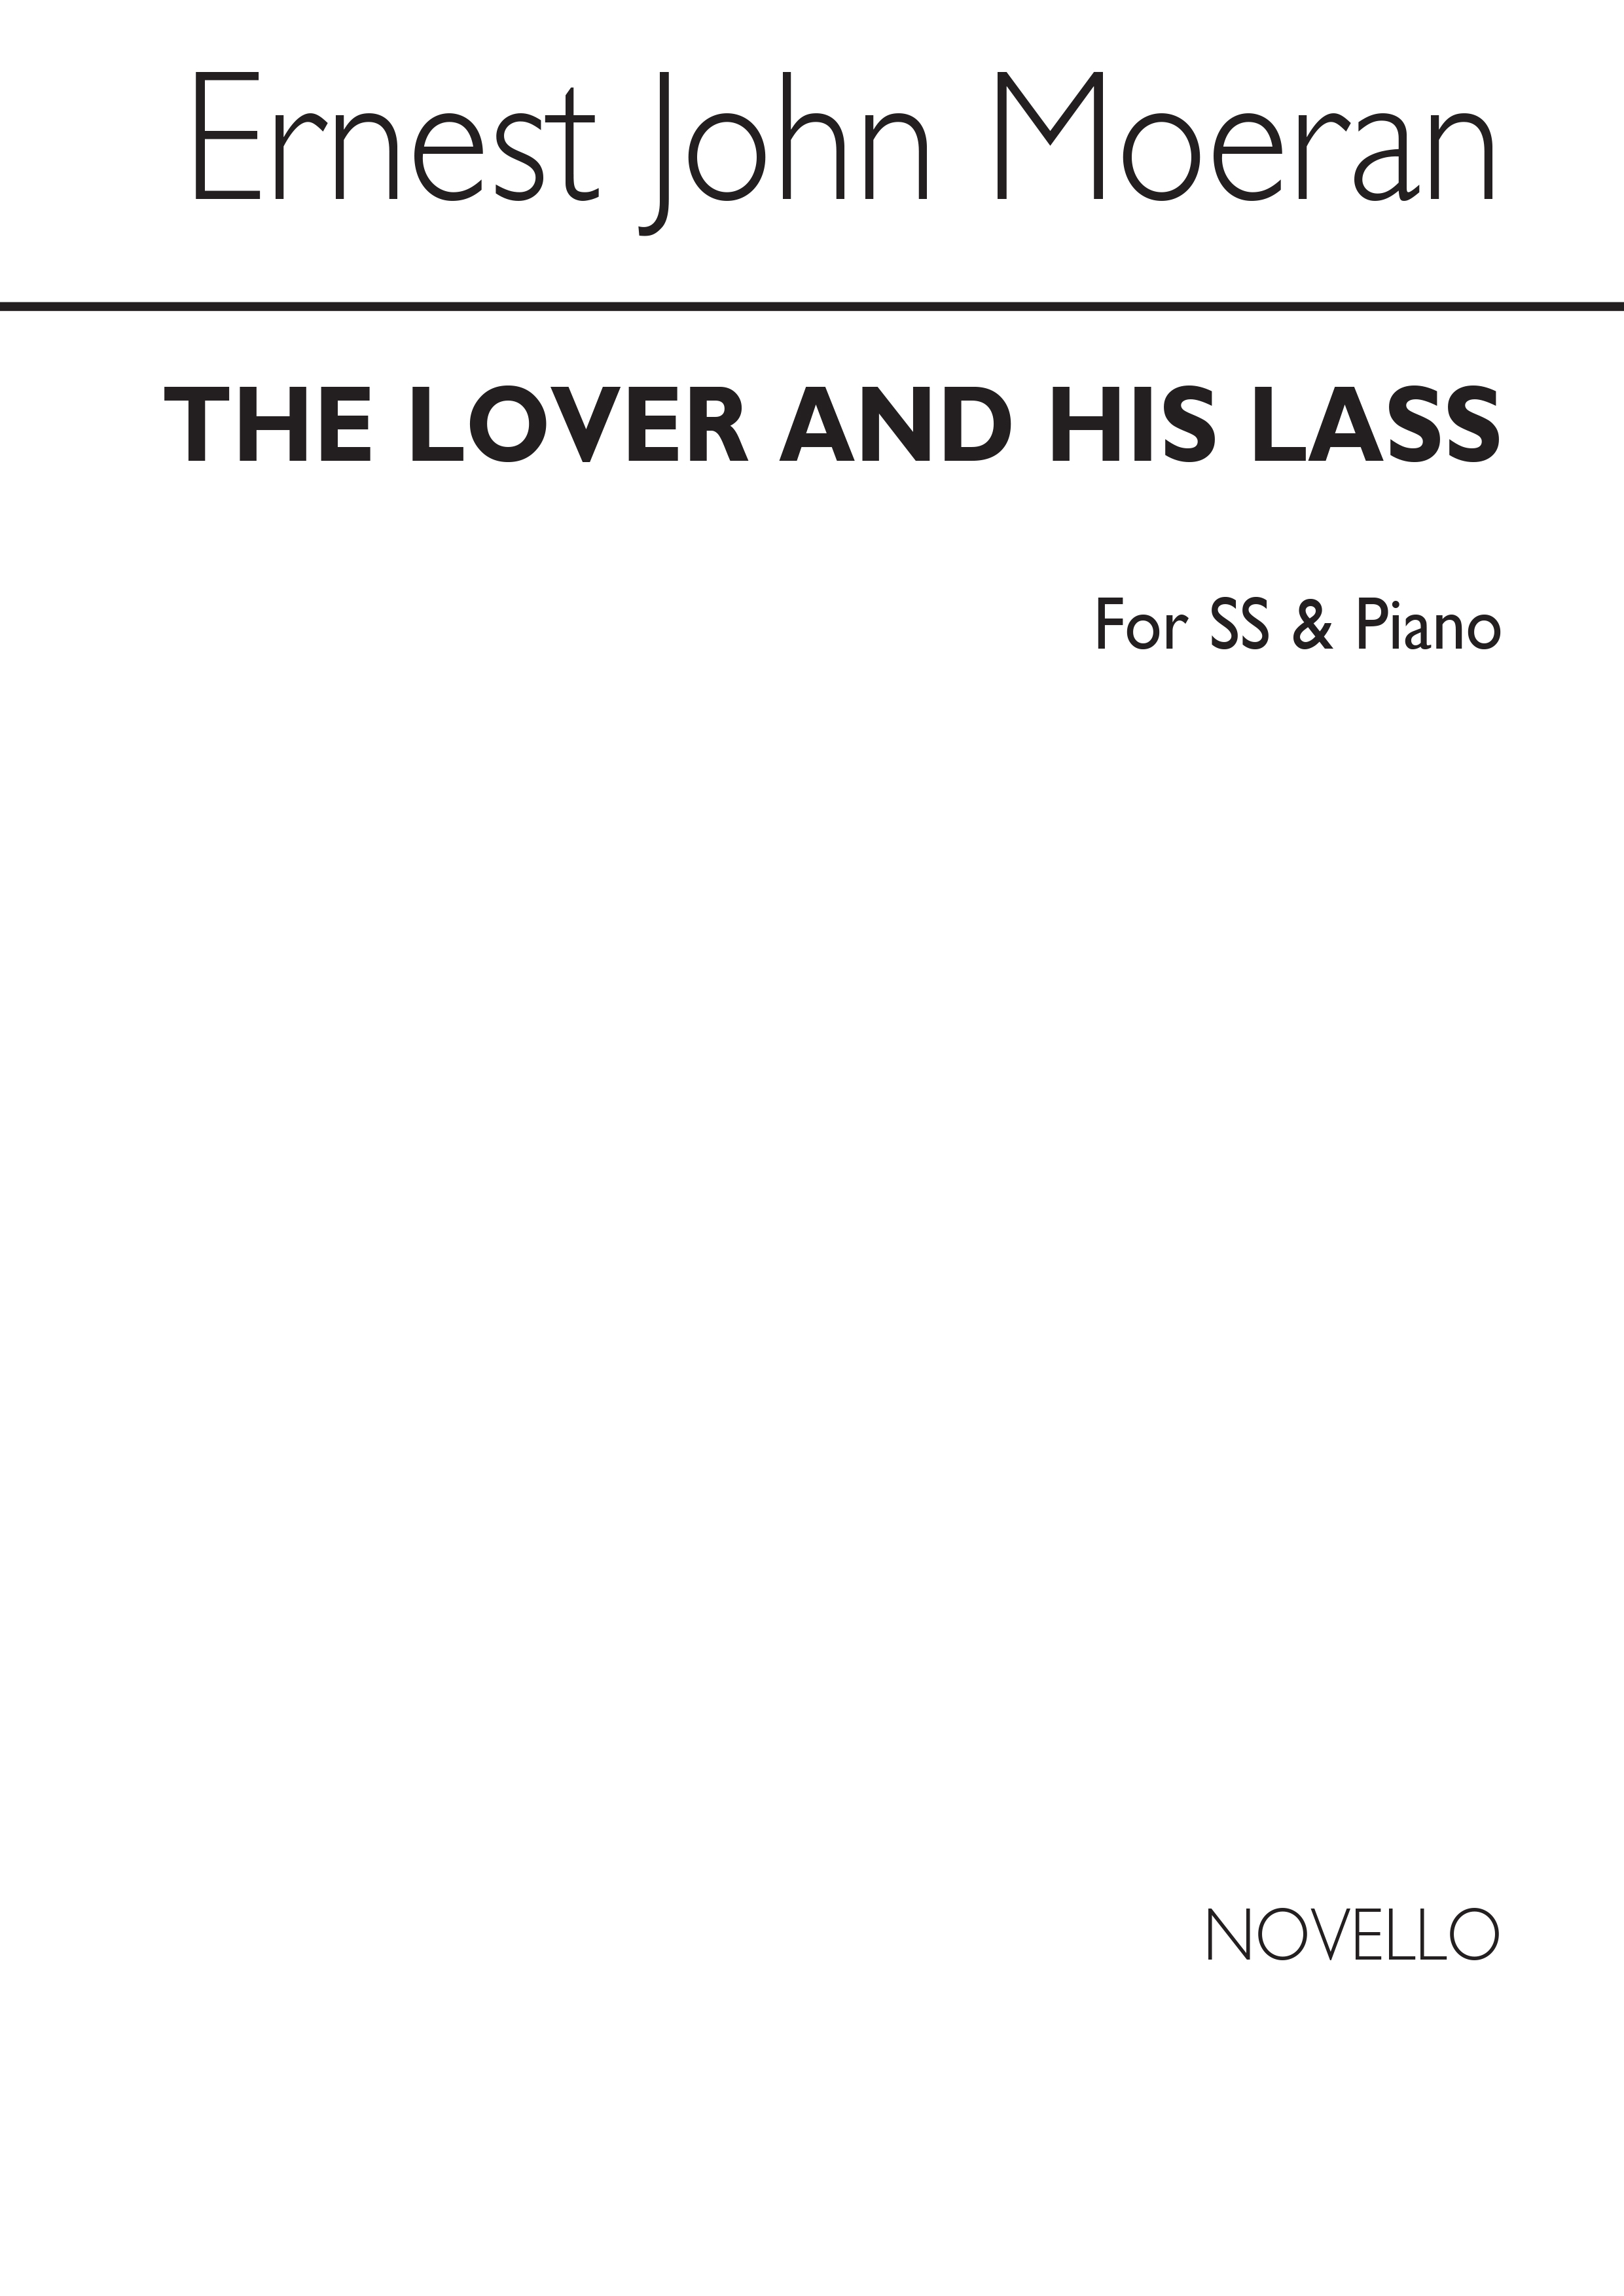 Moeran: The Lover And His Lass for SS Chorus with Piano acc.